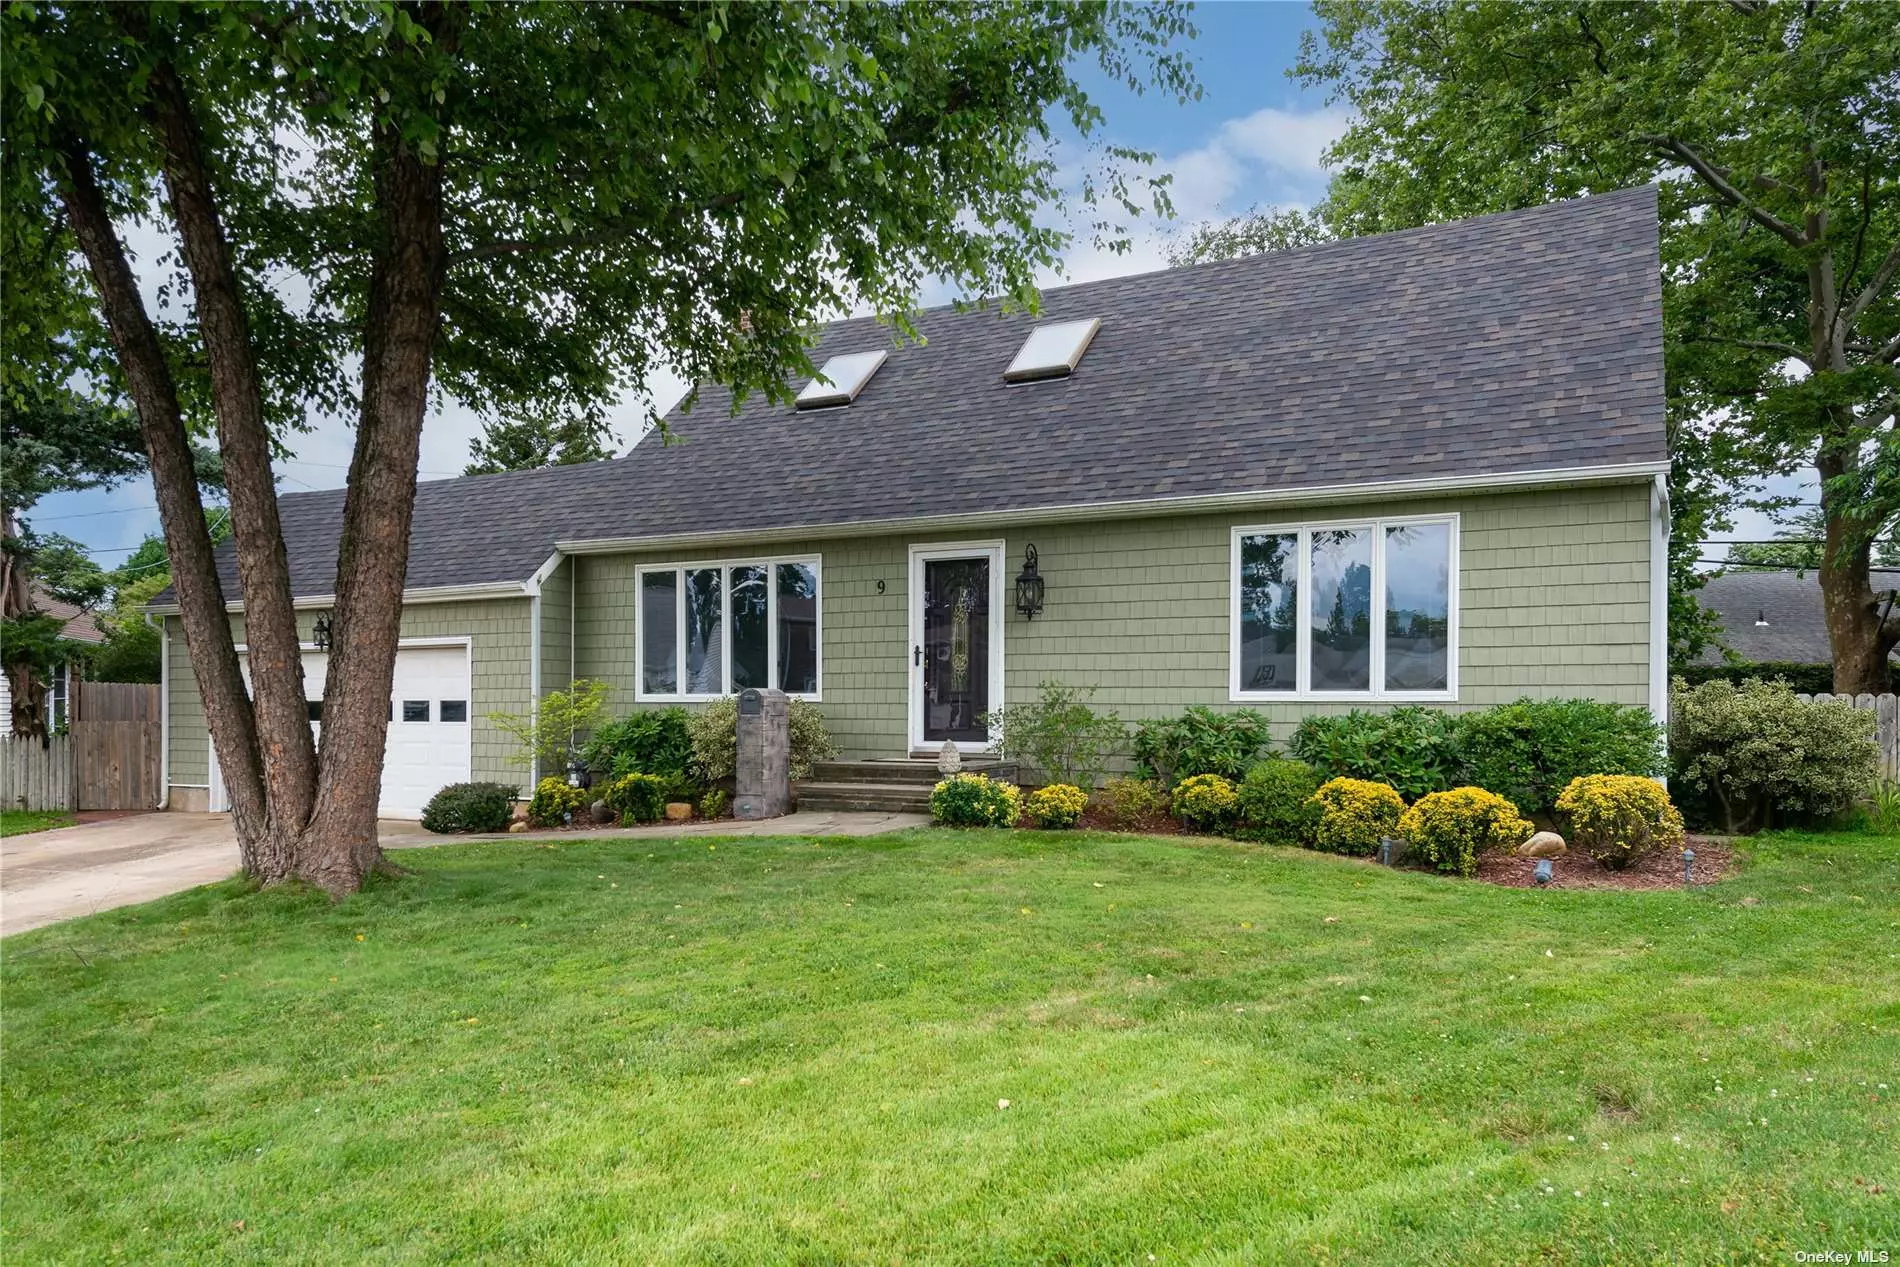 This Charming Expanded Cape is Gracefully Situated on a Cul de Sac in Syosset. Syosset is one of the Exciting Towns on the North Shore of Long Island with Restaurants, Shopping, Entertainment Venues and Beaches nearby and so Much More. This Home Features a Primary Bedroom and Full Bath on the Main Level, Living Room, Formal Dining Room, Open Kitchen to Family Room and Sliders to a Beautiful Yard with Outside Entrance to the Two Car Garage. The Upstairs Features Three Bedrooms and Full Bath. New Roof 1 Year Old, Gas Furnace and Gas Hot Water Heater 9 Months Old. Beautifully Landscaped Property with Expanded Patio and Flat Yard. Mature Trees and Plantings Provide Wonderful Privacy.